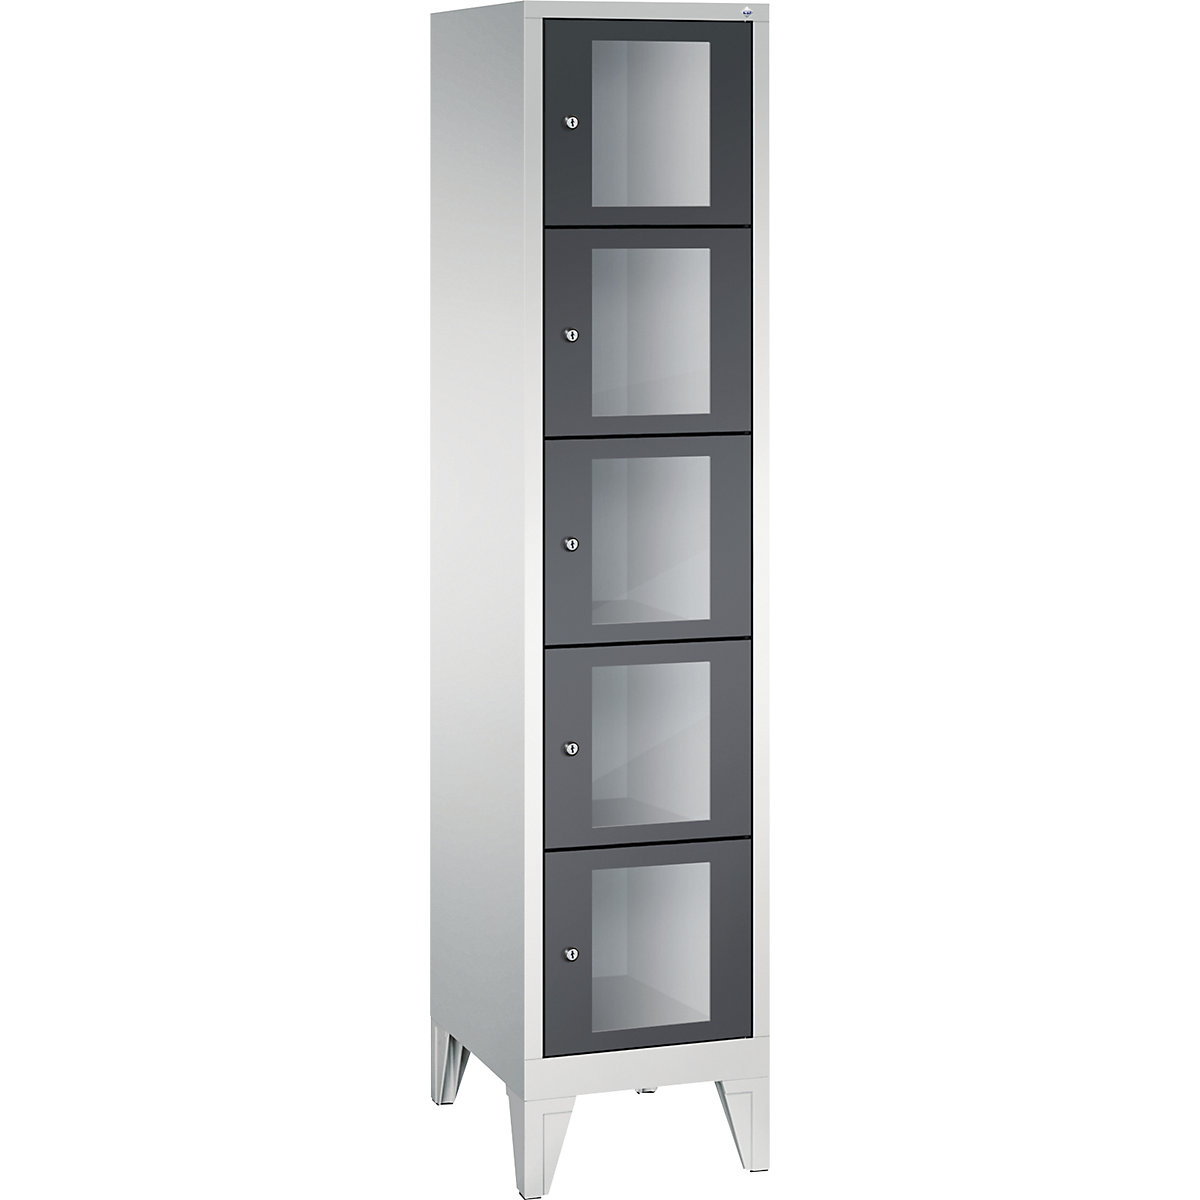 C+P – CLASSIC locker unit, compartment height 295 mm, with feet, 5 compartments, width 420 mm, black grey door